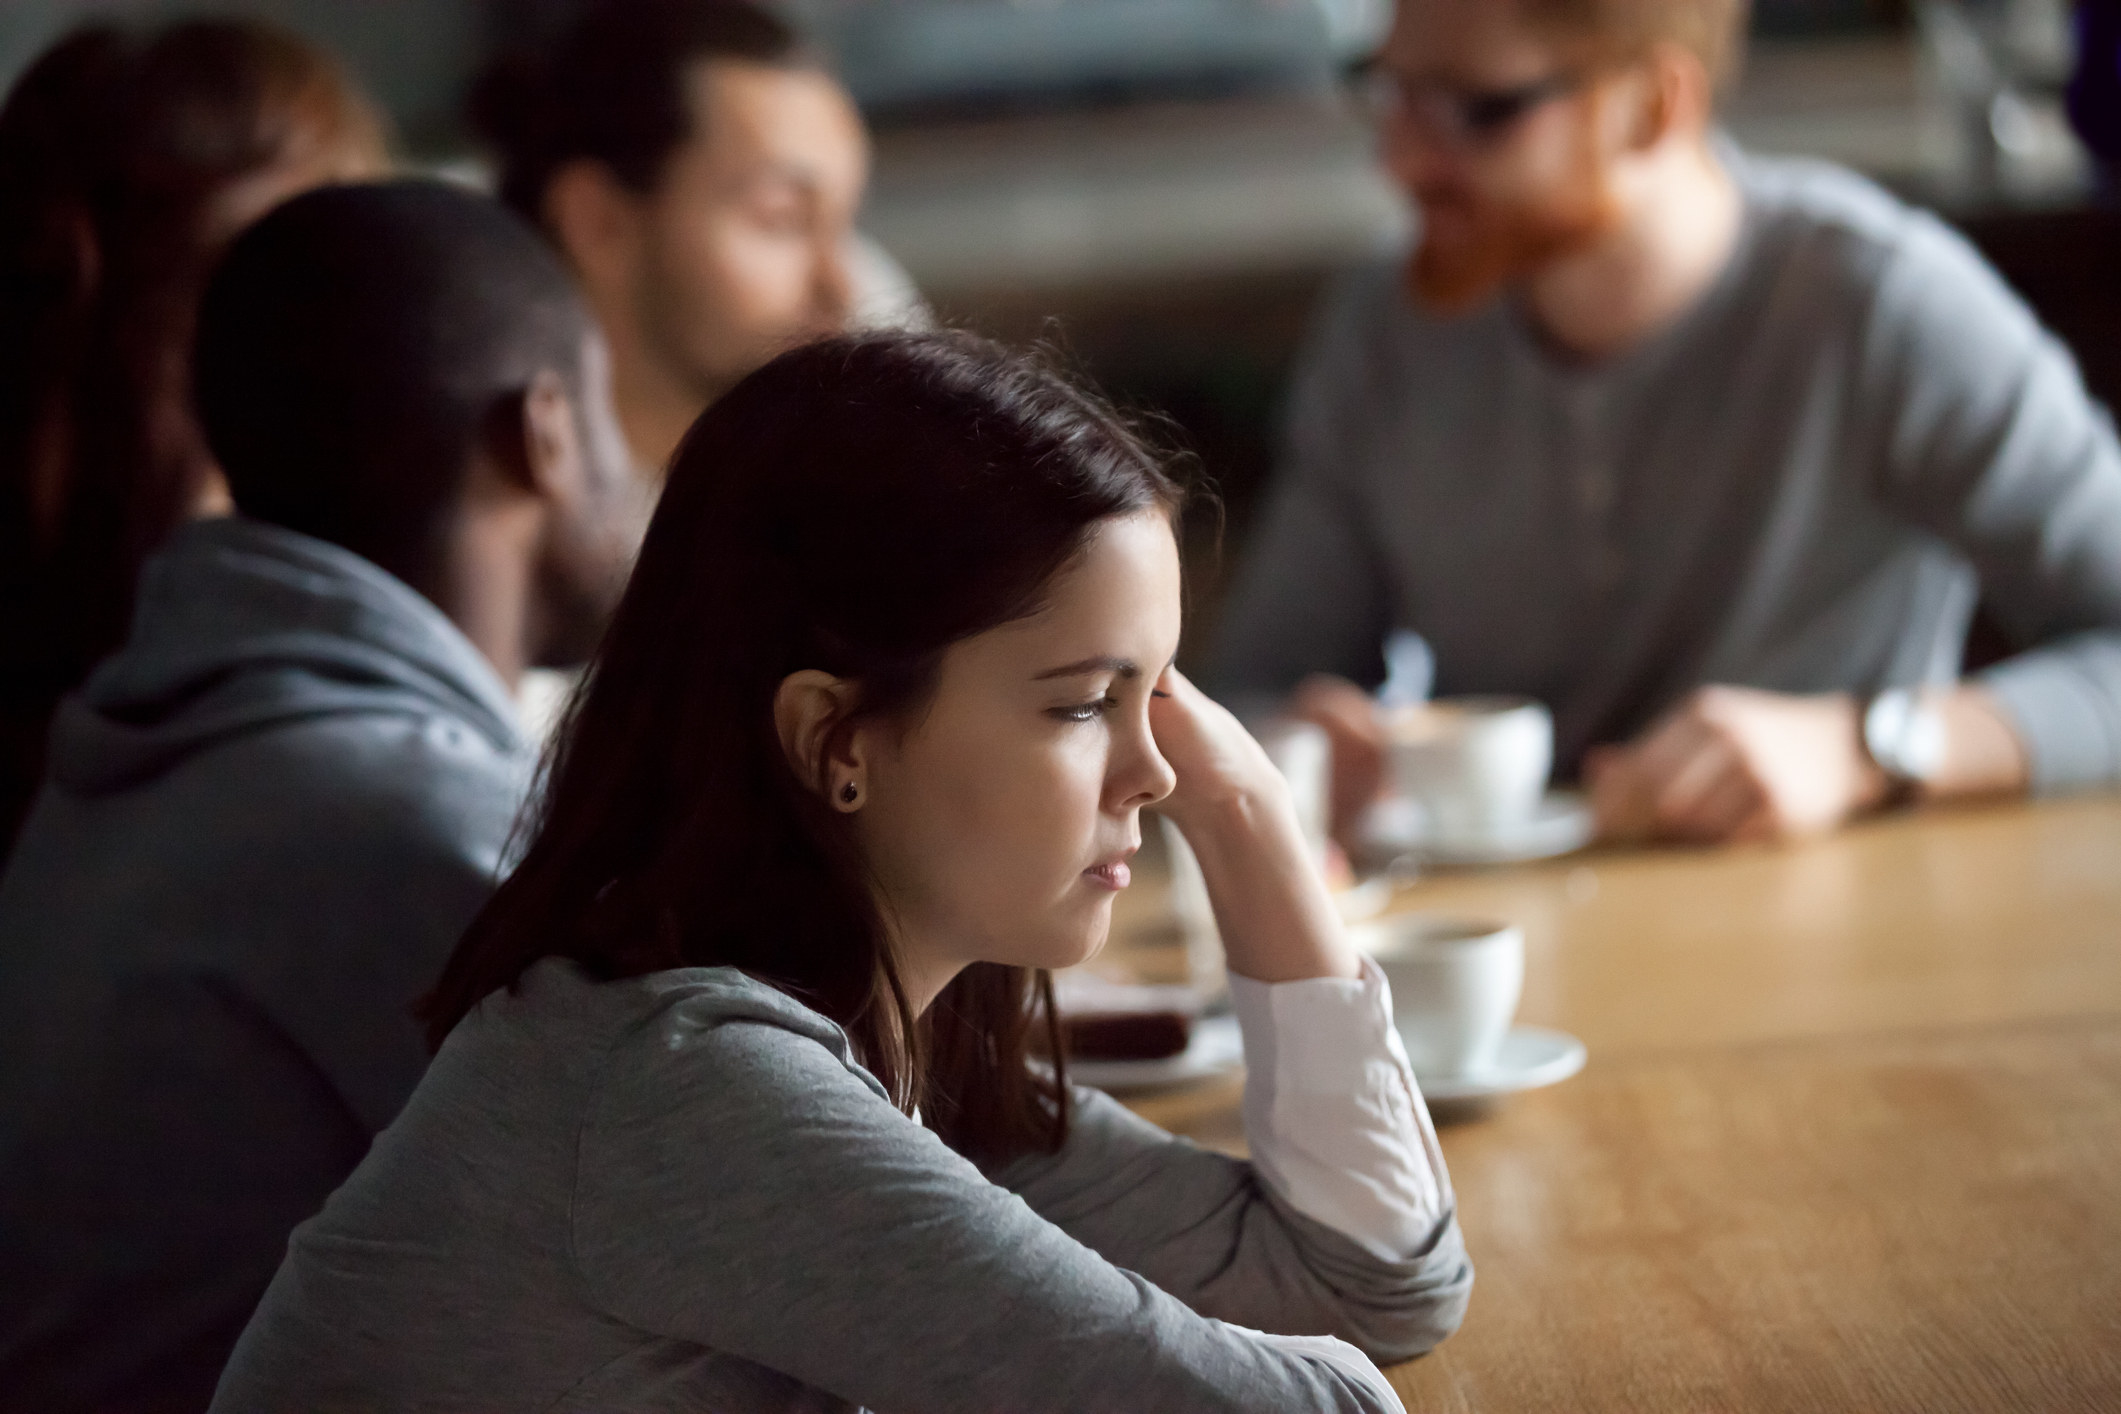 A stock image of a woman sitting alone staring ahead as a group of people talk beside her